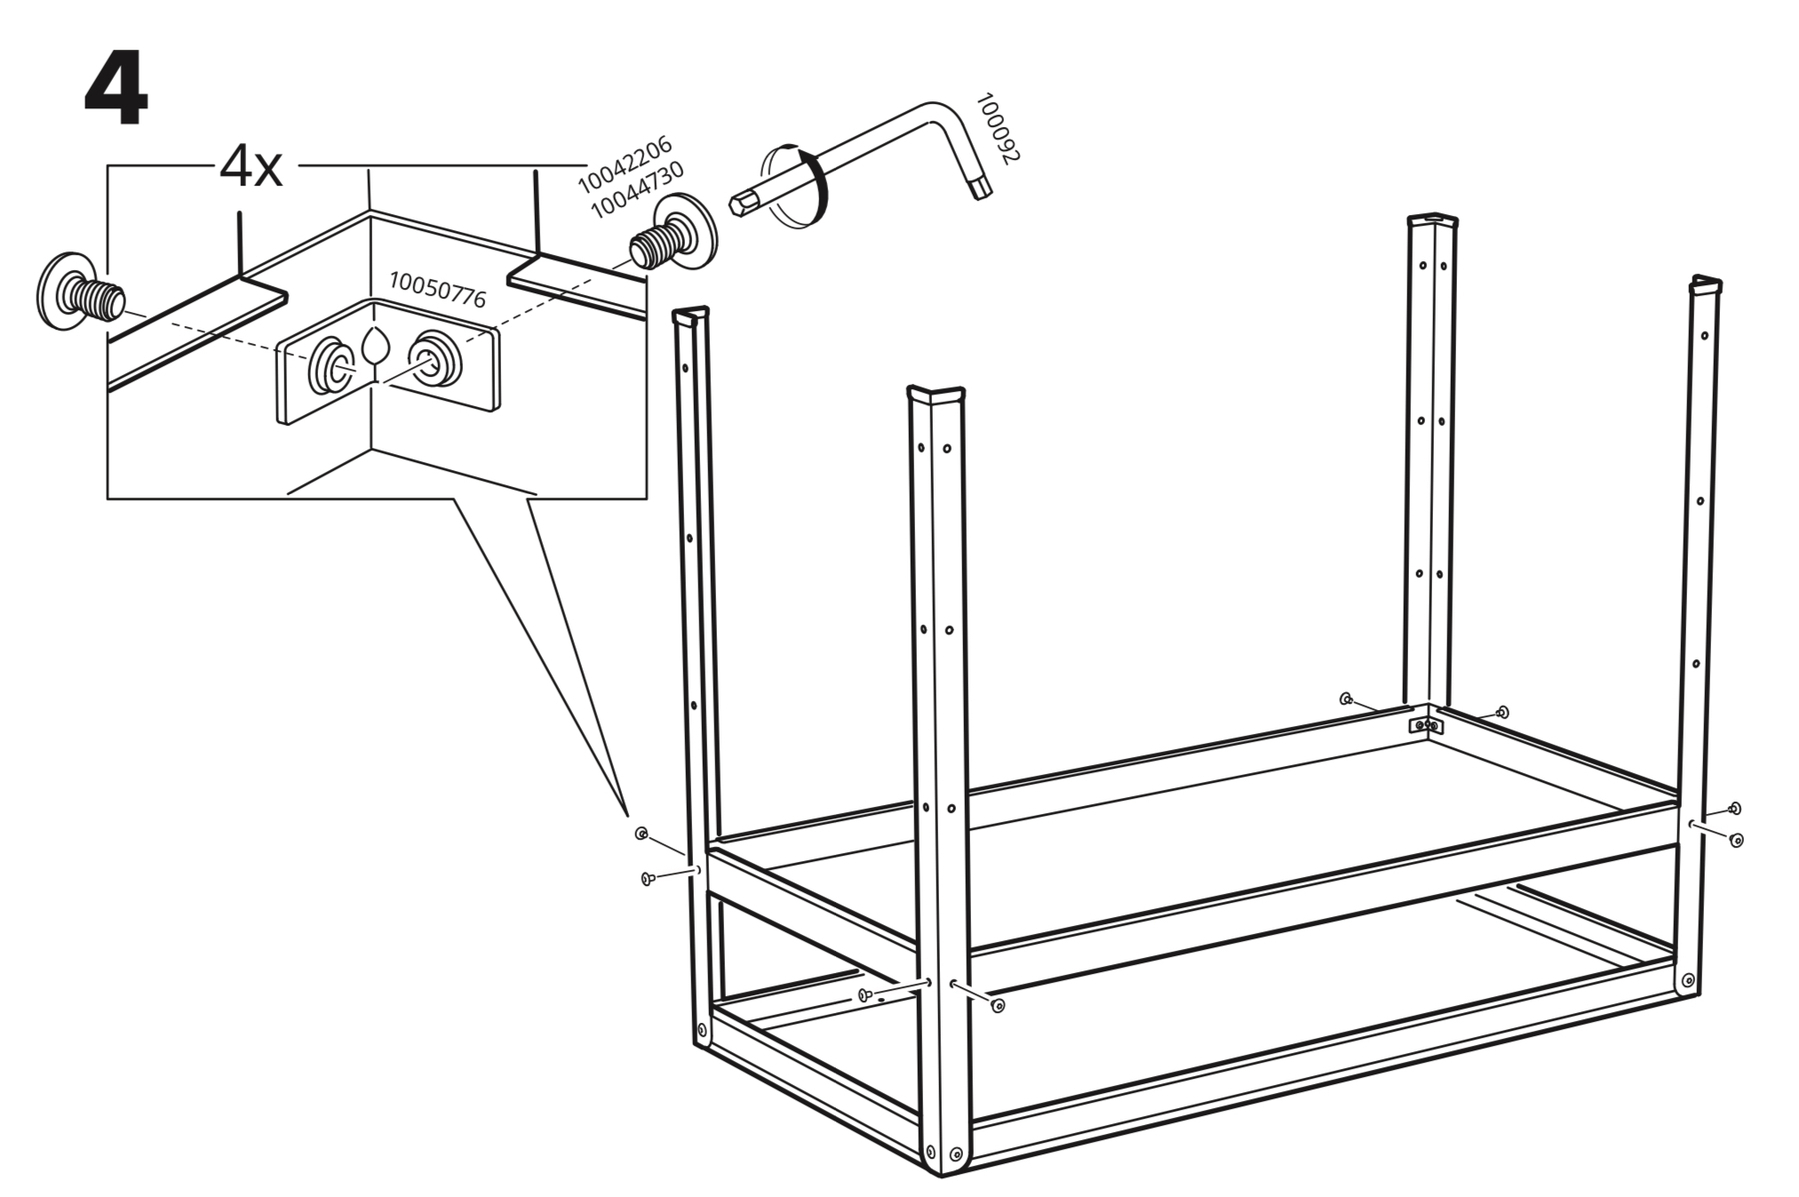 Step 4 of the IKEA assembly instructions showing an upside down unit with the top on the floor, and 4 legs sticking up. There is a shelf being installed between the legs offset by ~25 cm from the top of the work bench. There is nothing holding the shelf up in the picture.